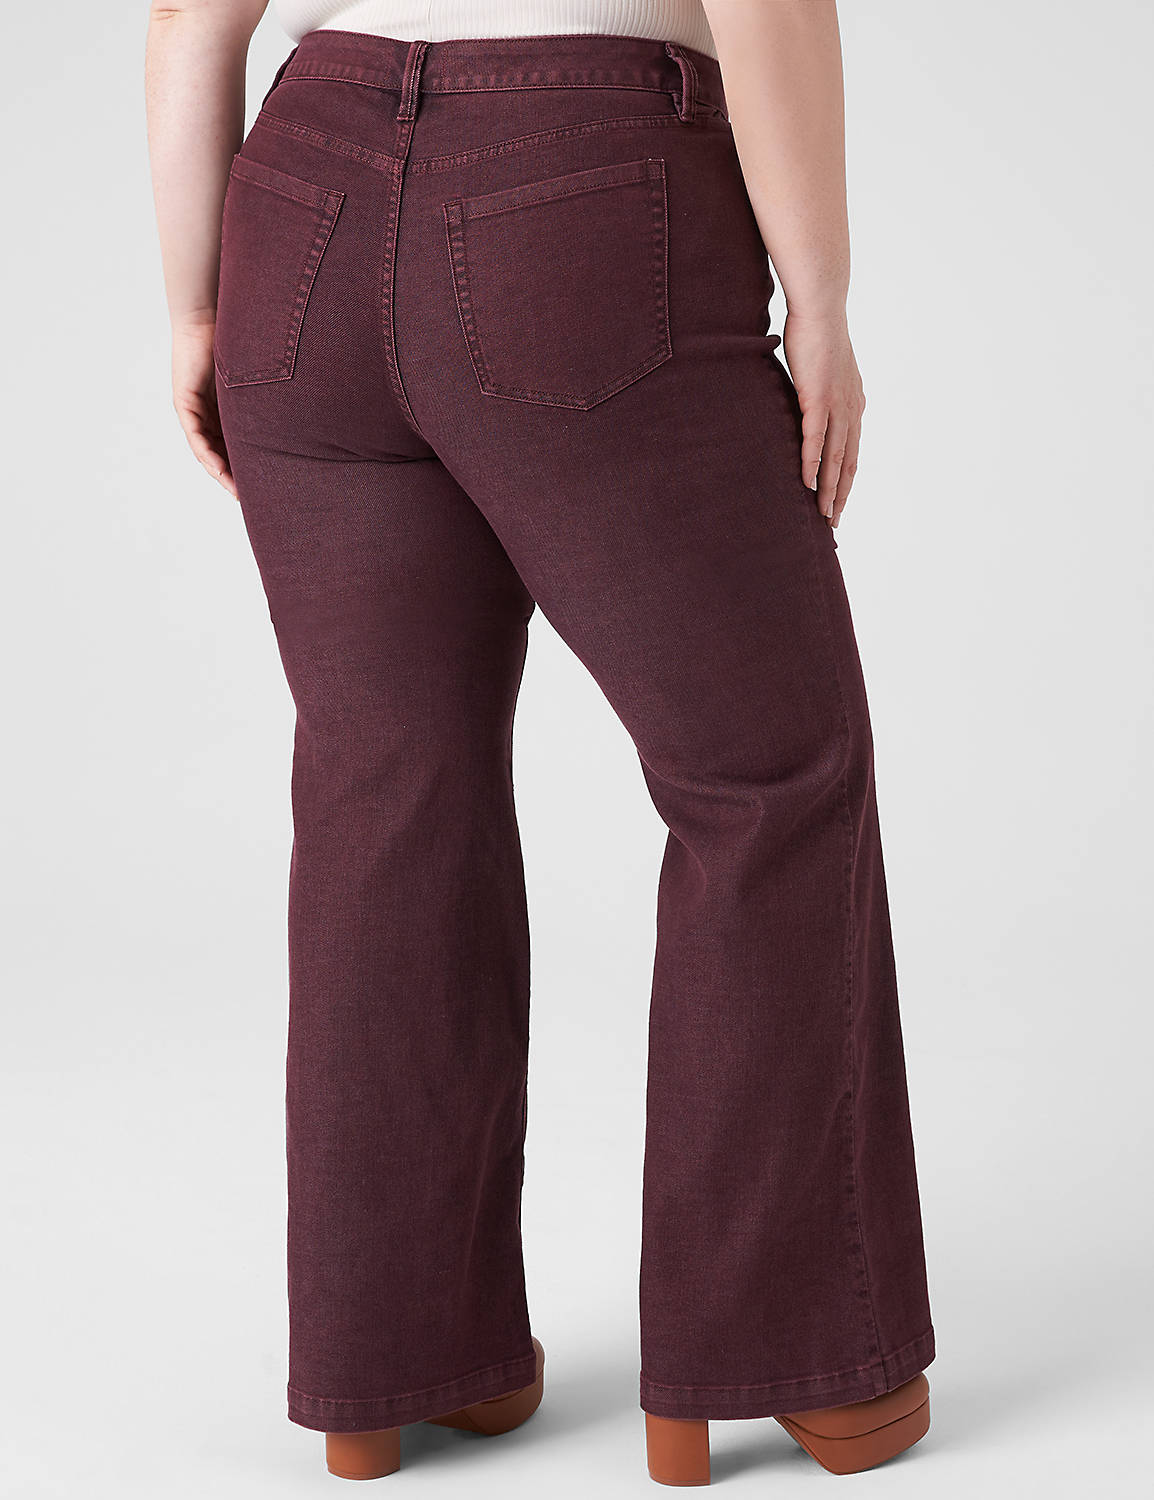 SIGNATURE FIT MID RISE FLARE JEAN Product Image 2